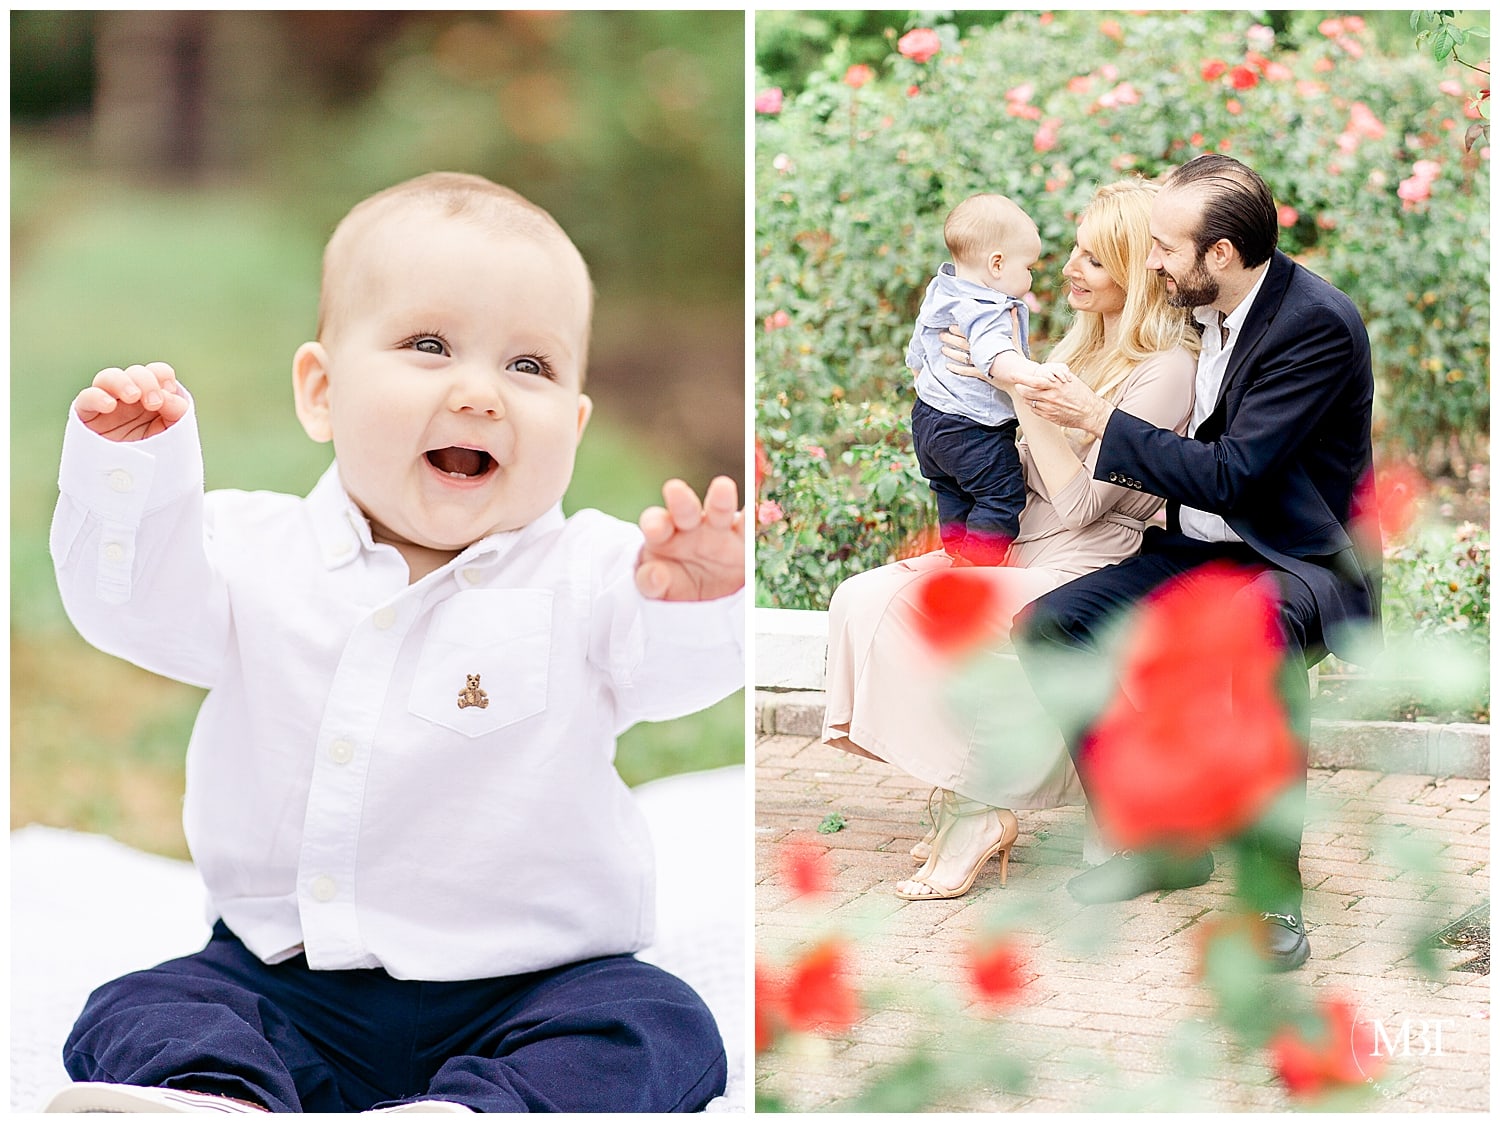 parents playing with their son and a happy baby boy during their family session at Bon Air Park in Arlington, Virginia taken by a family photographer